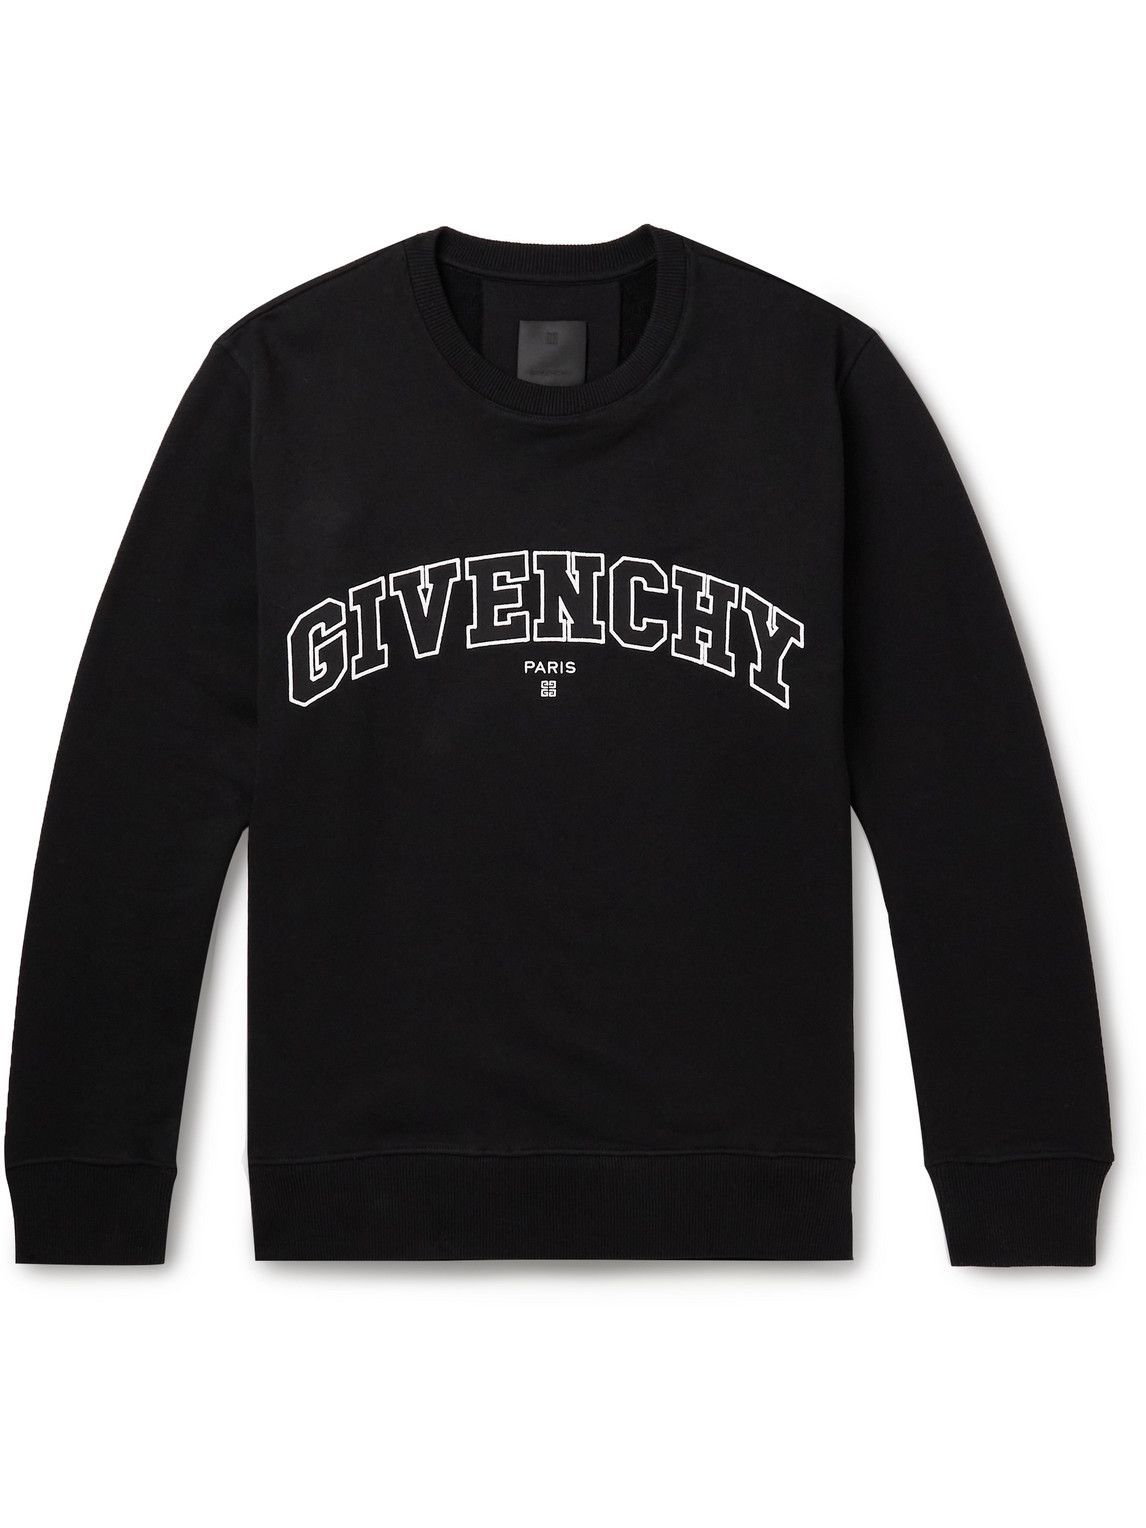 Photo: Givenchy - College Logo-Embroidered Cotton-Jersey Sweatshirt - Black